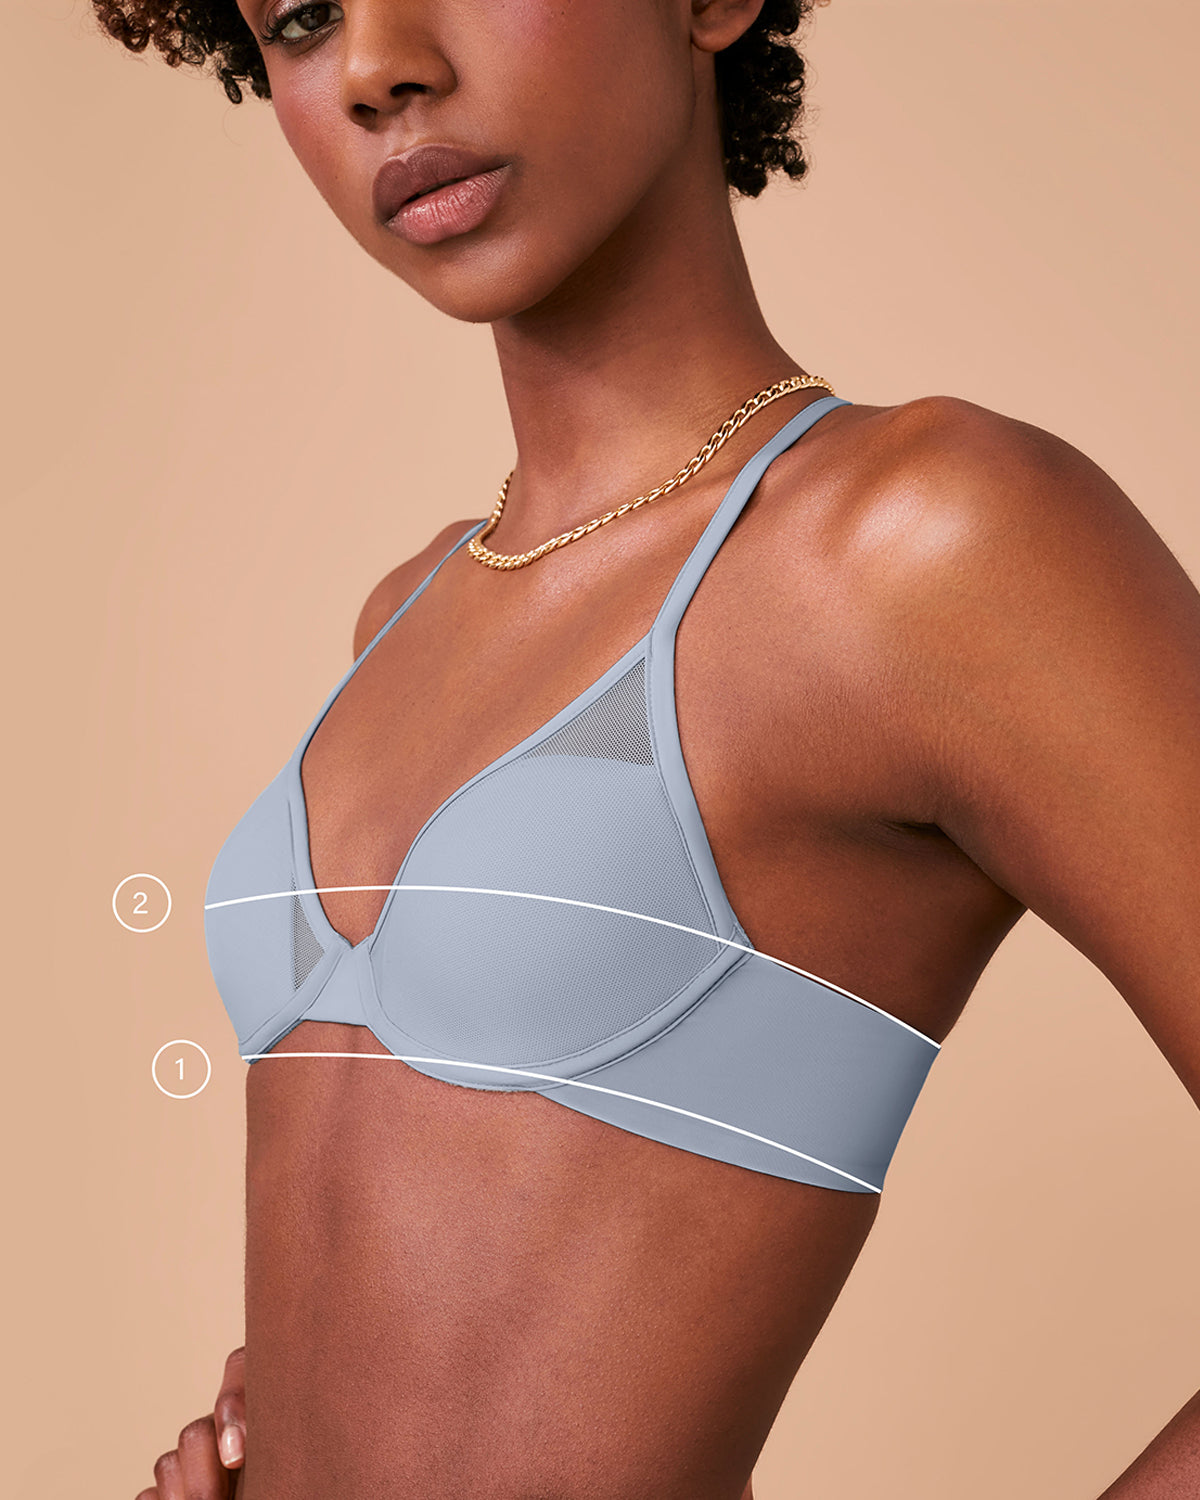 Bra Fit Guide, How To Measure Bra Size